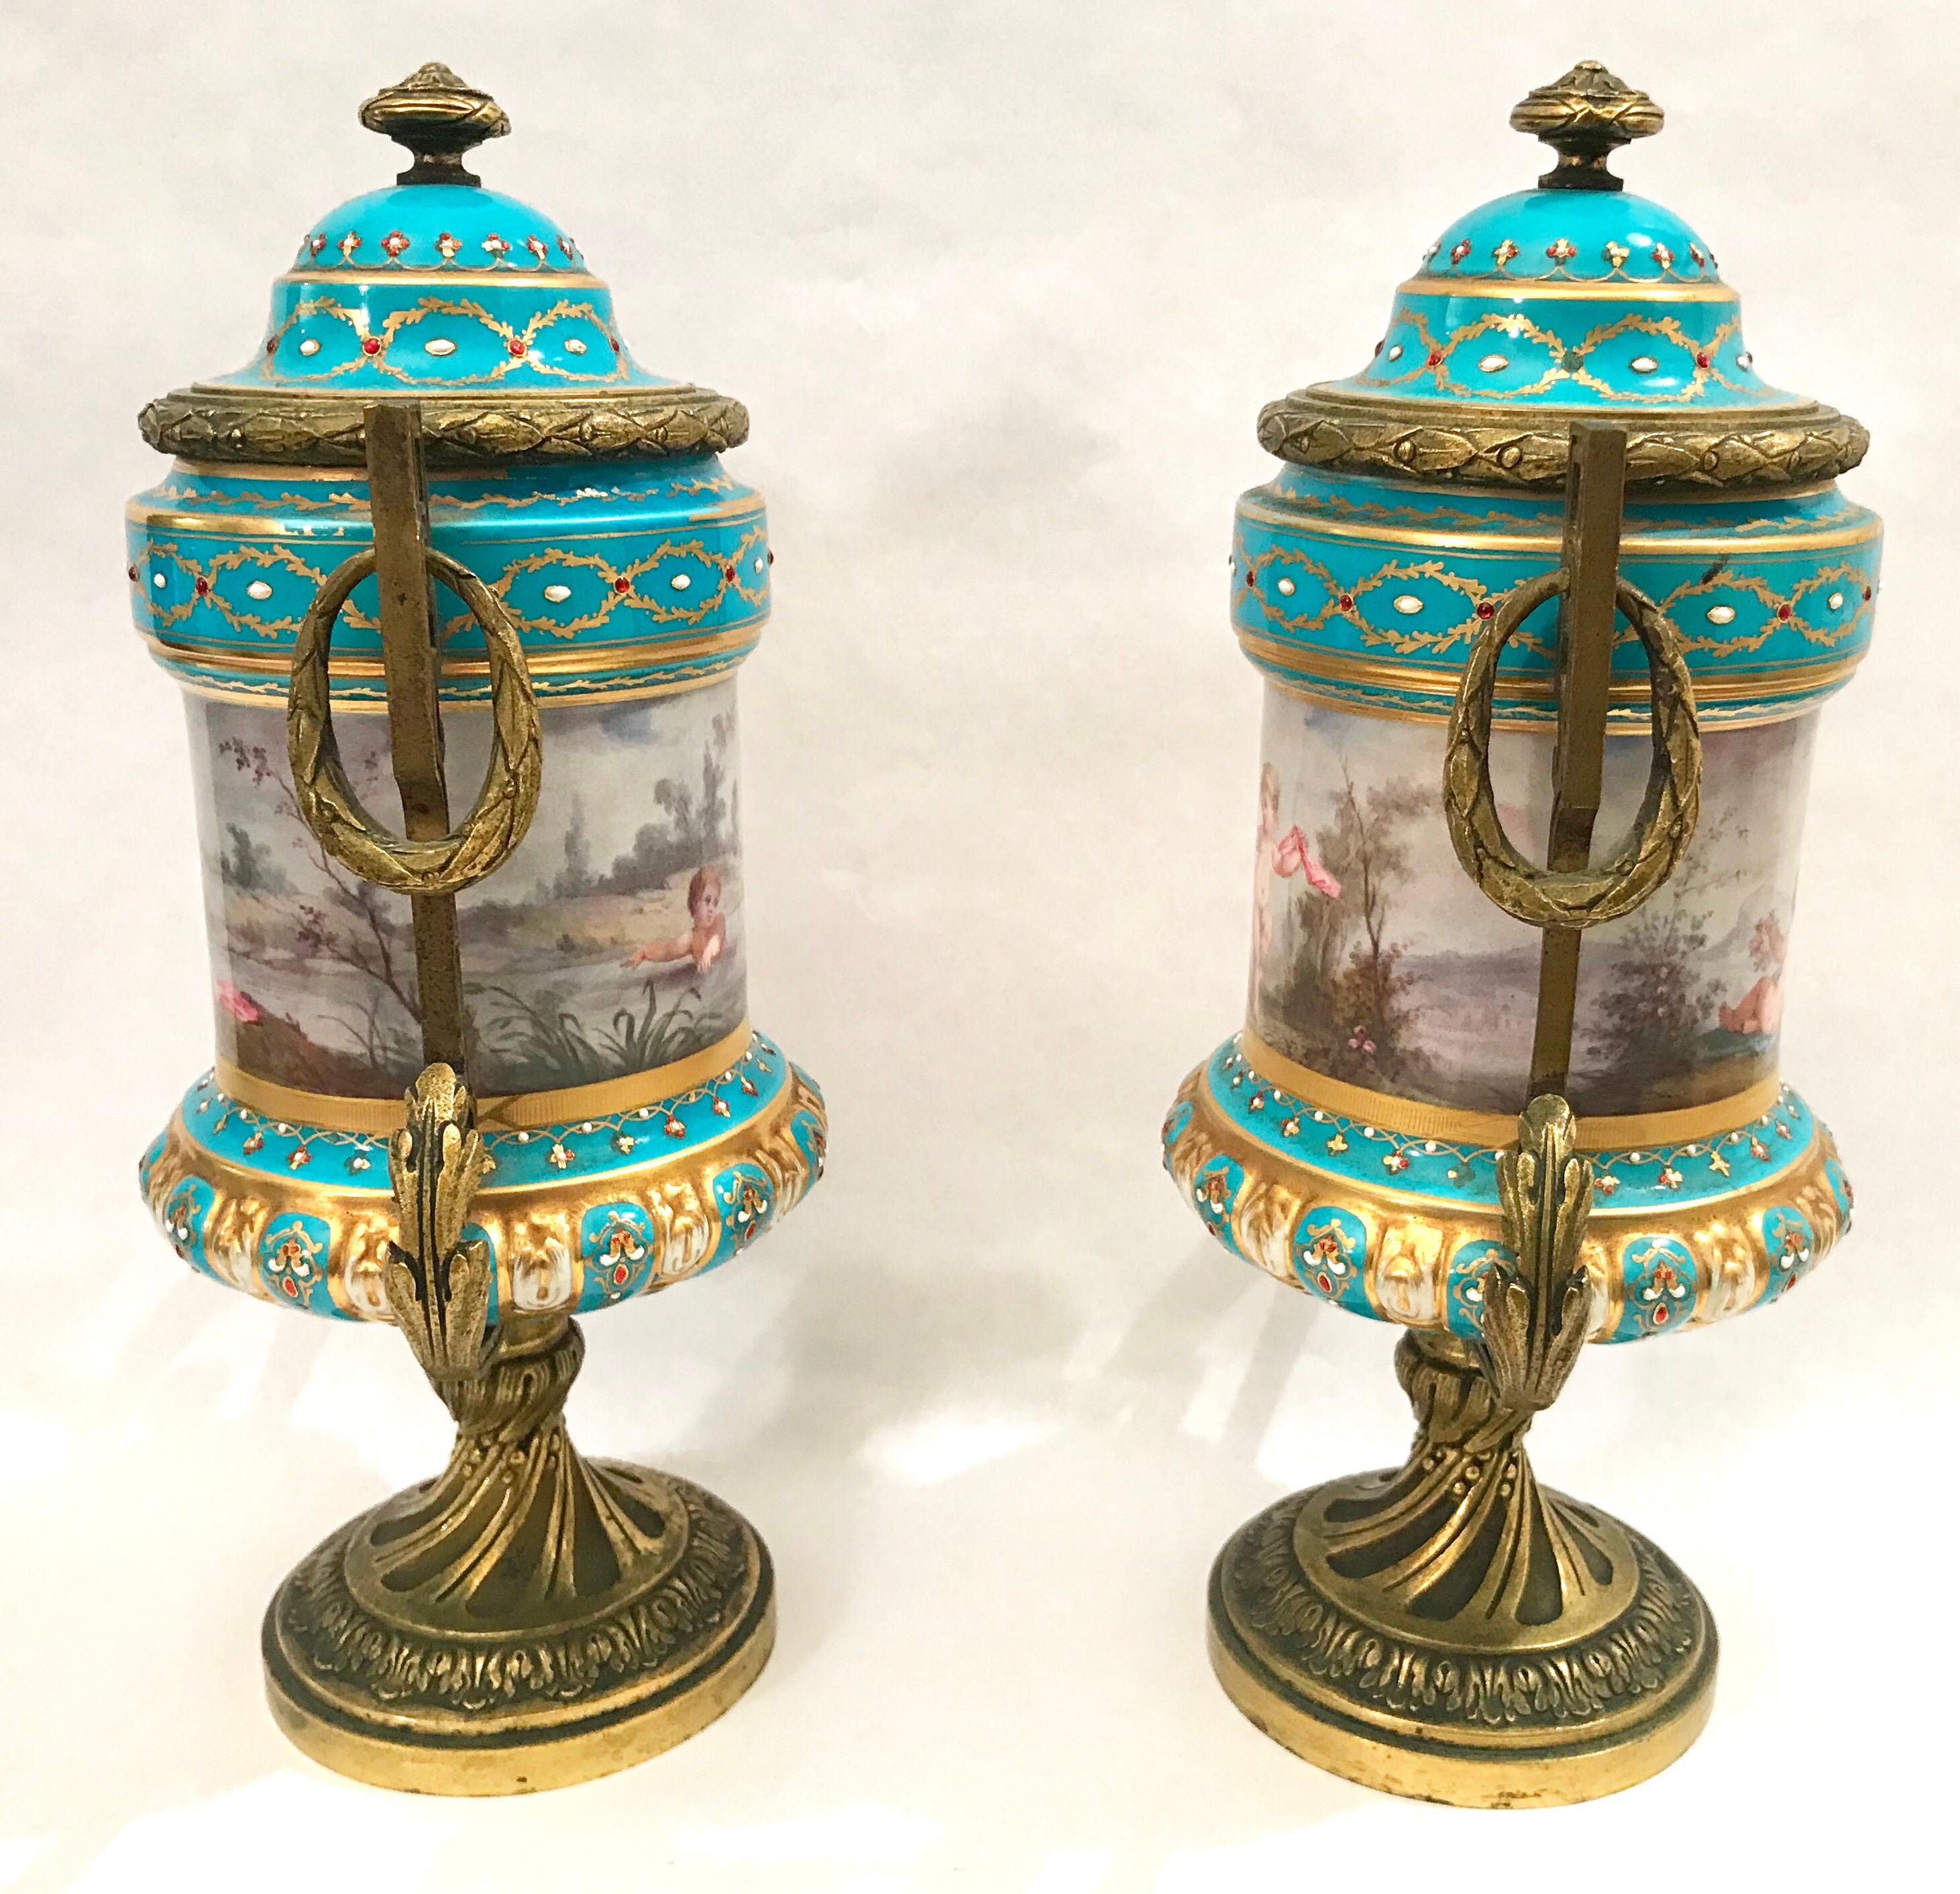 Pair of French Gilt Bronze Mounted Porcelain Lidded Urns For Sale 5